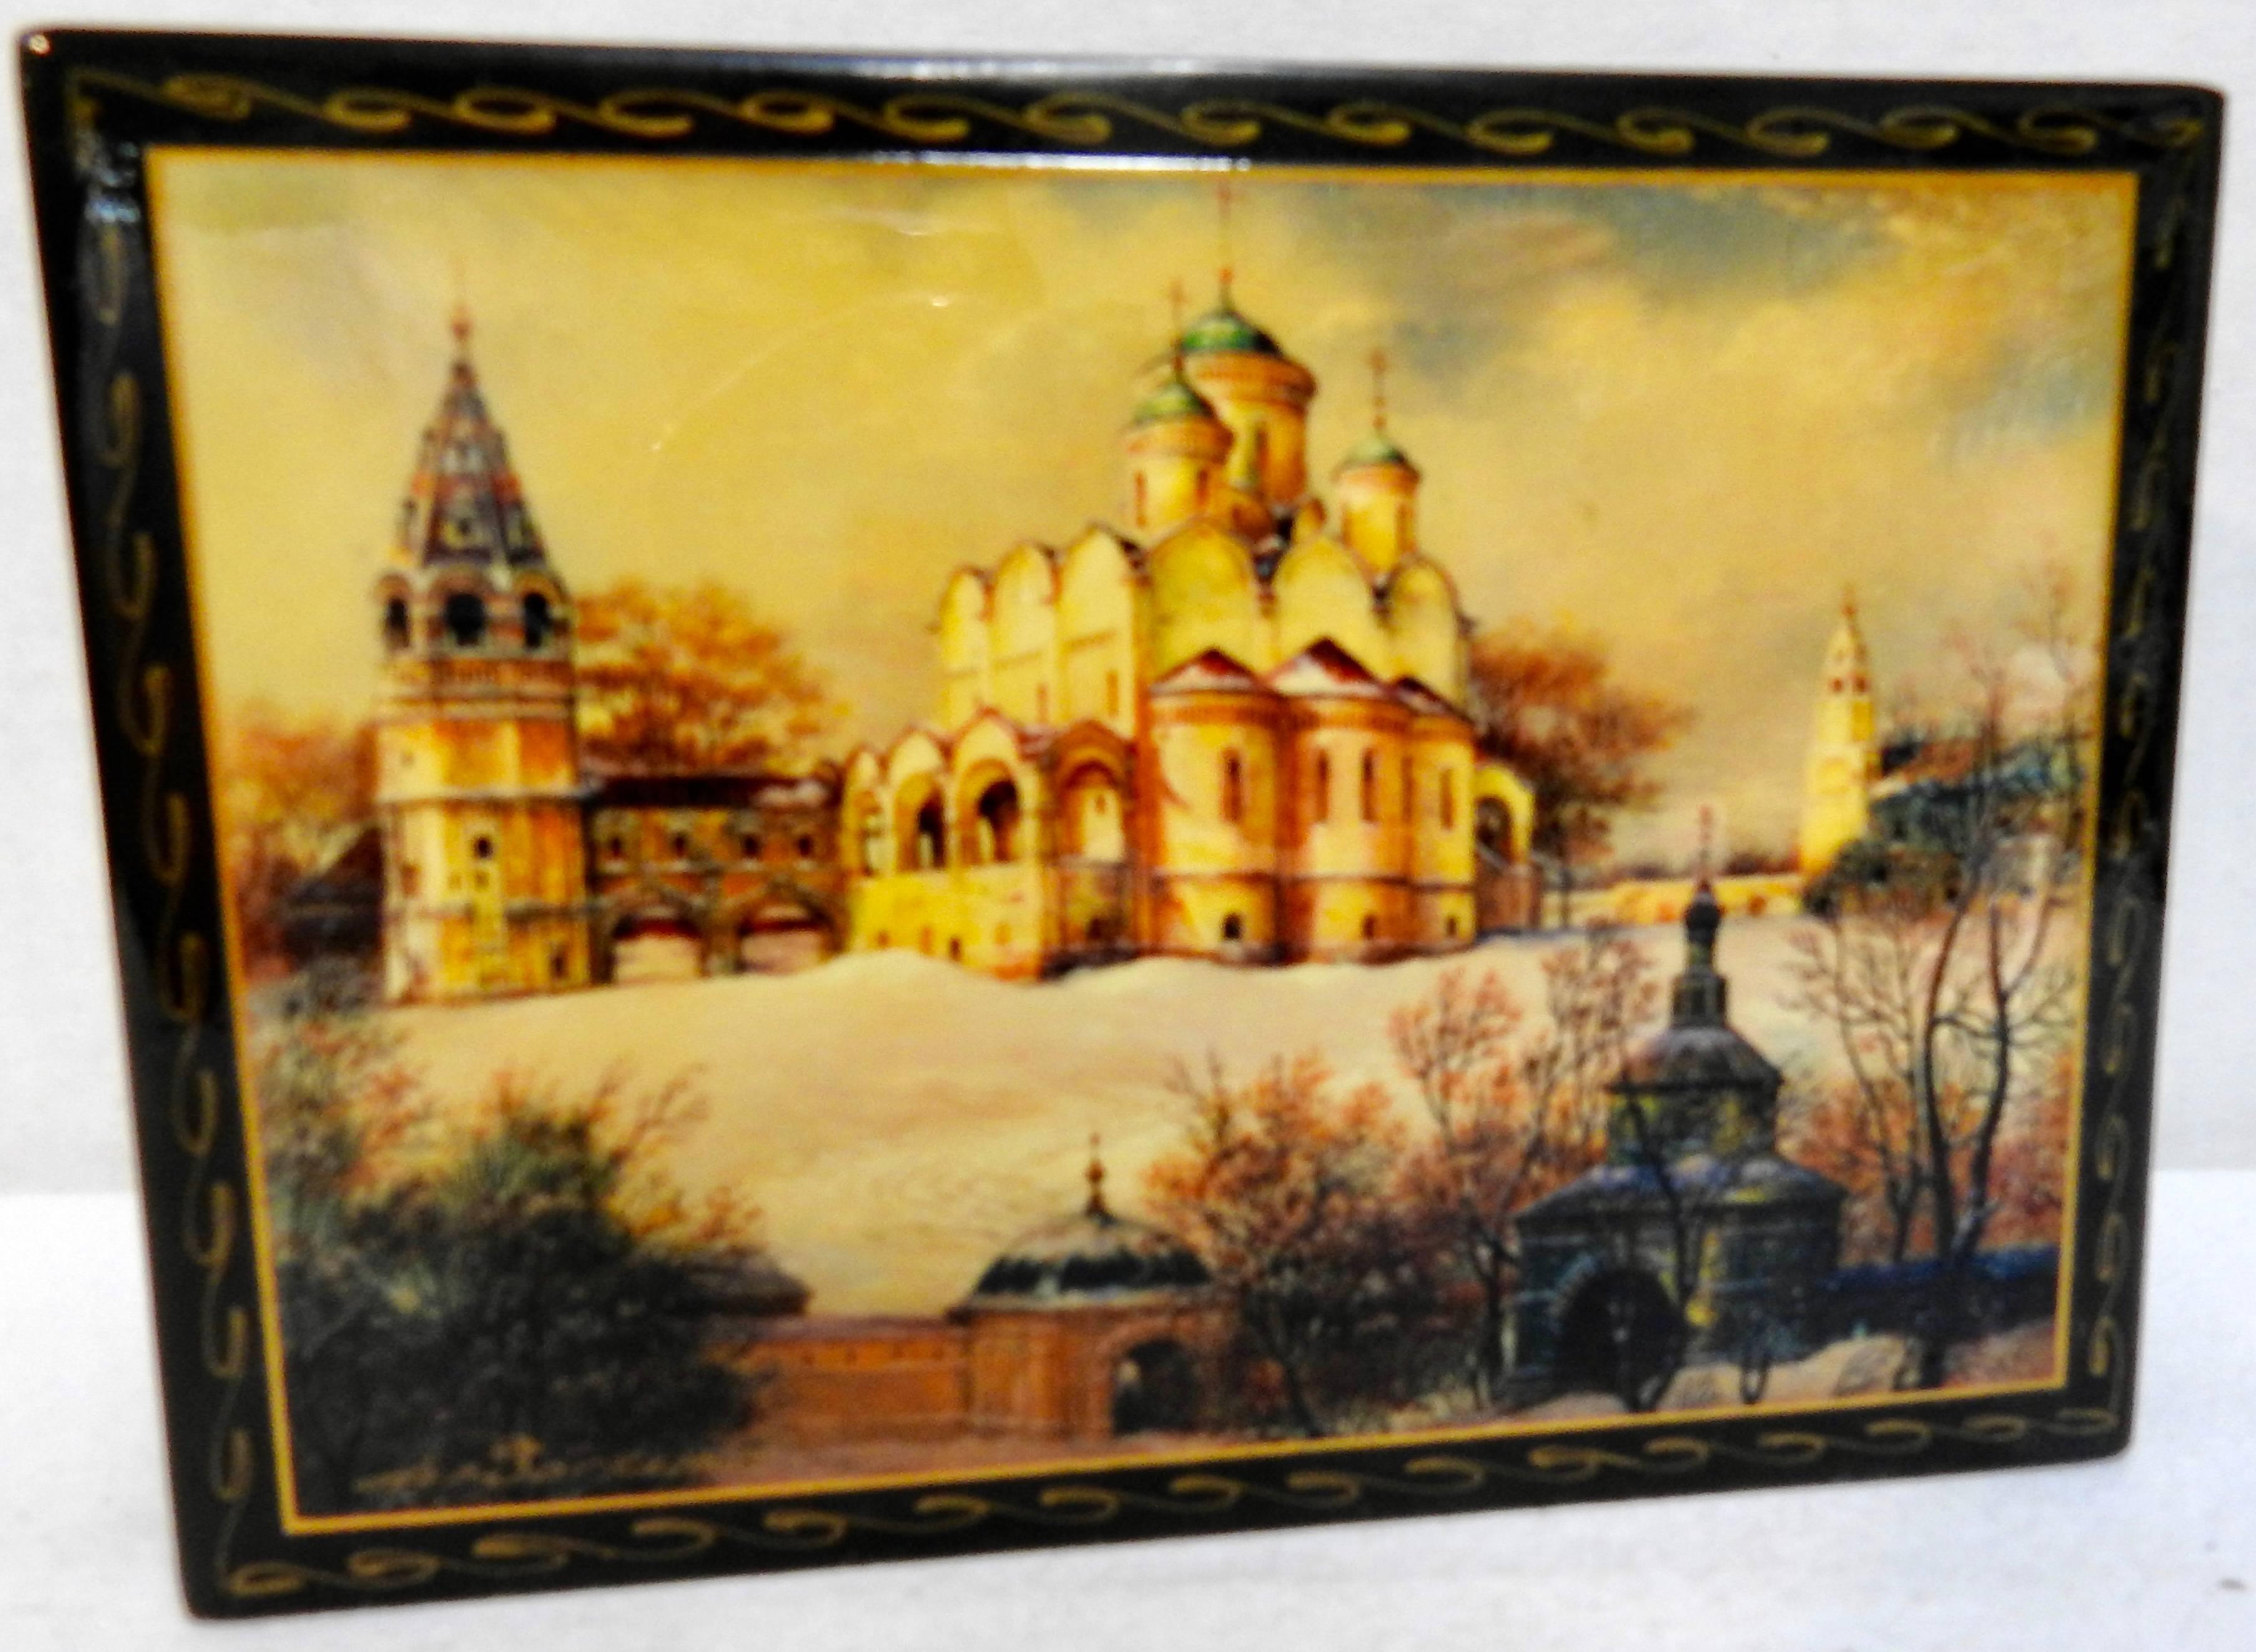 A snow scene surrounds the elaborate Annunciation Cathedral located near the Kremlin on this Russian black lacquer box. The edges are decorated in waves of gold and the top opens to a vibrant red. The top is signed but we could not identify the